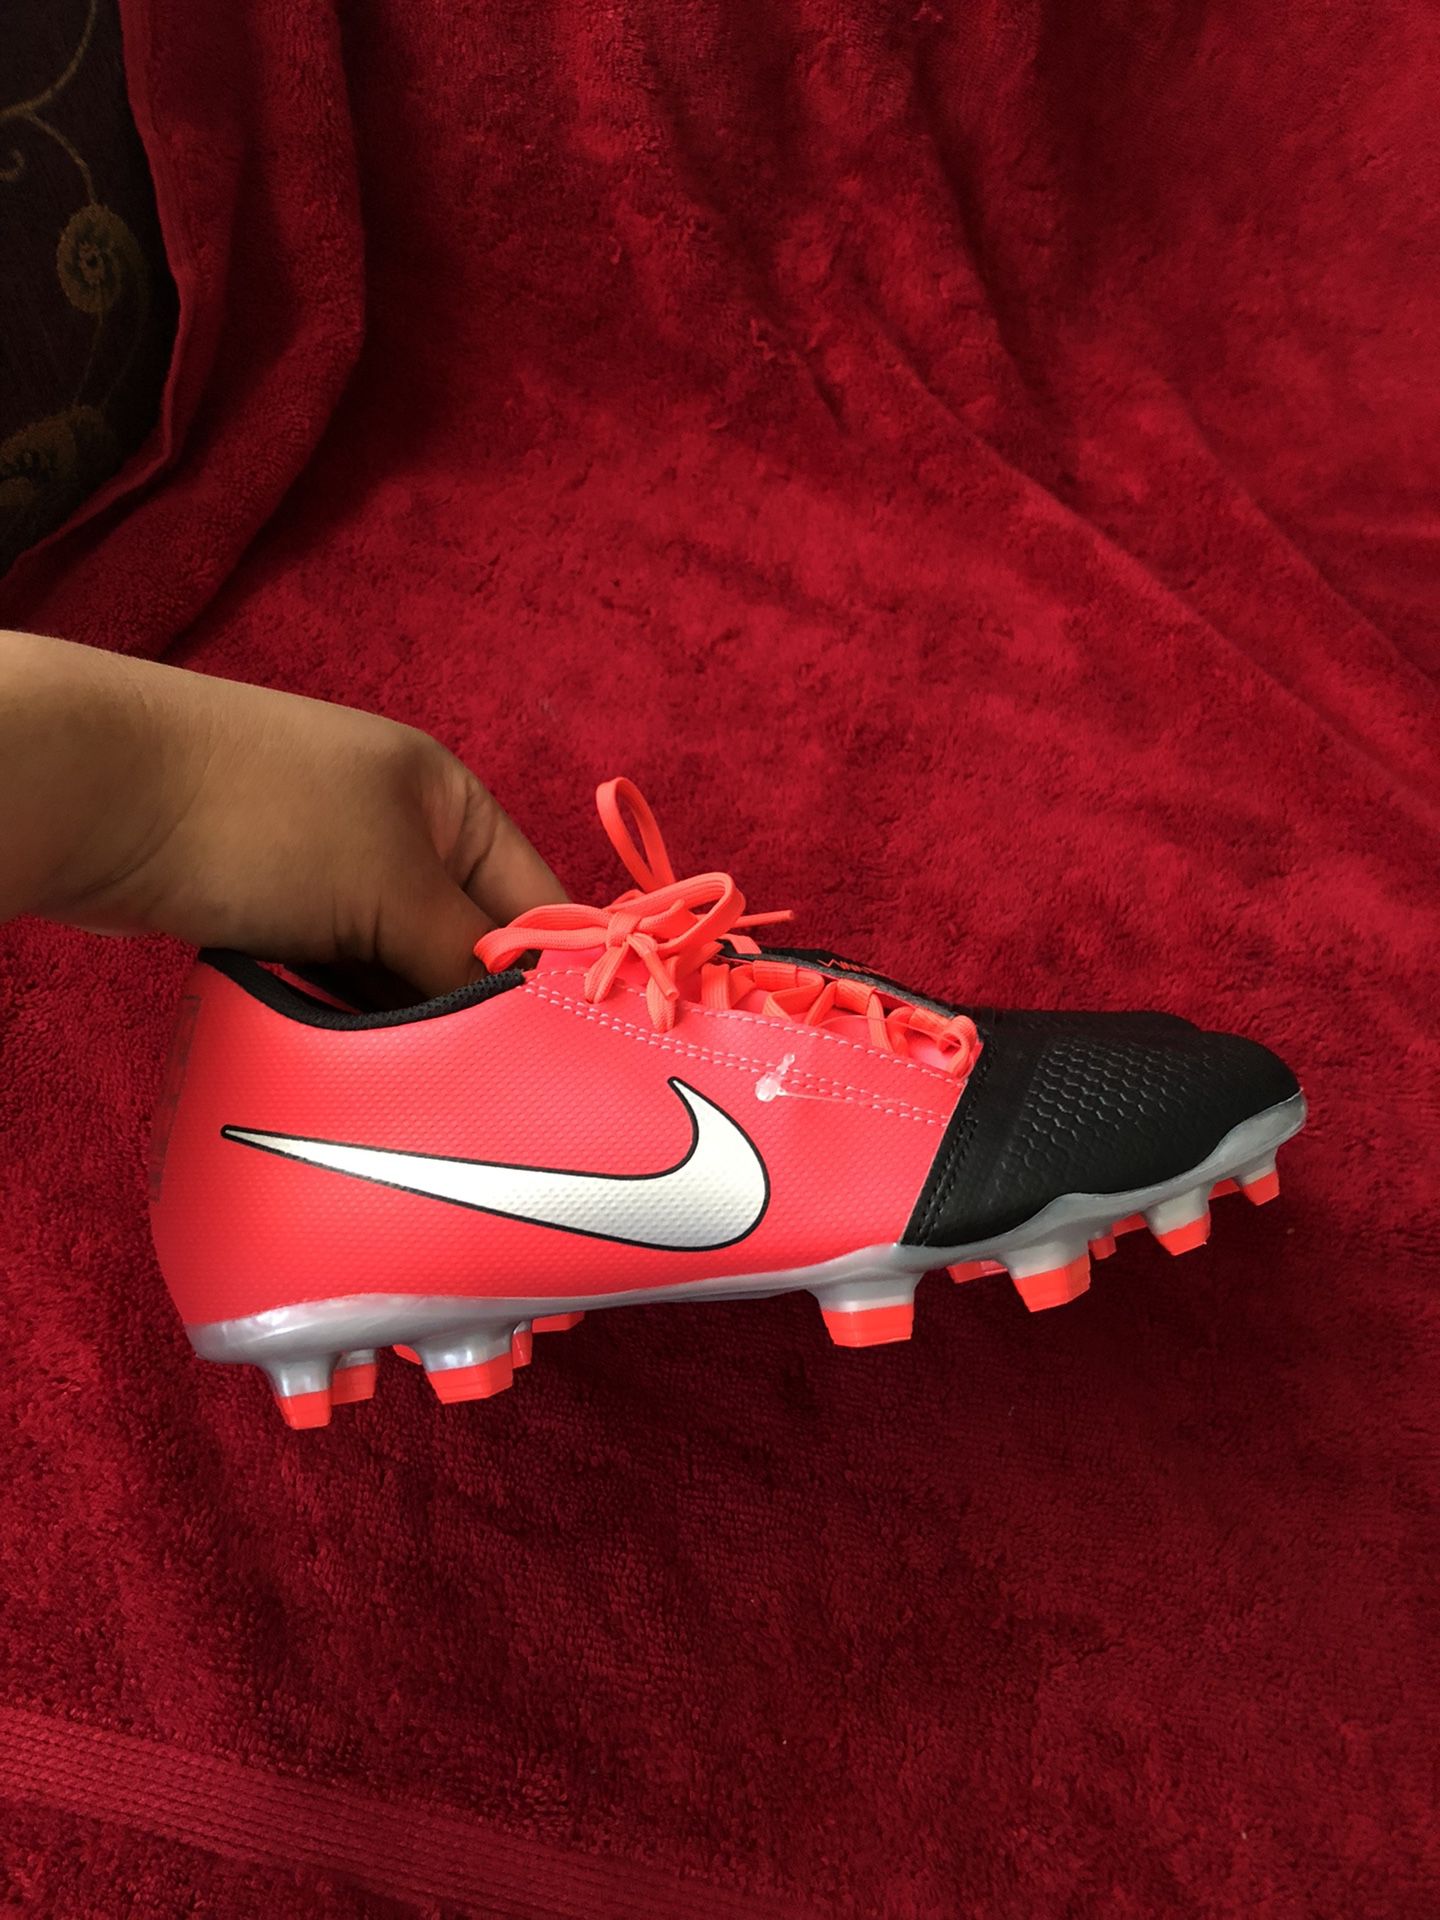 Mens Red Nike Phantom Soccer Cleats Size 65 For Sale In San Diego Ca